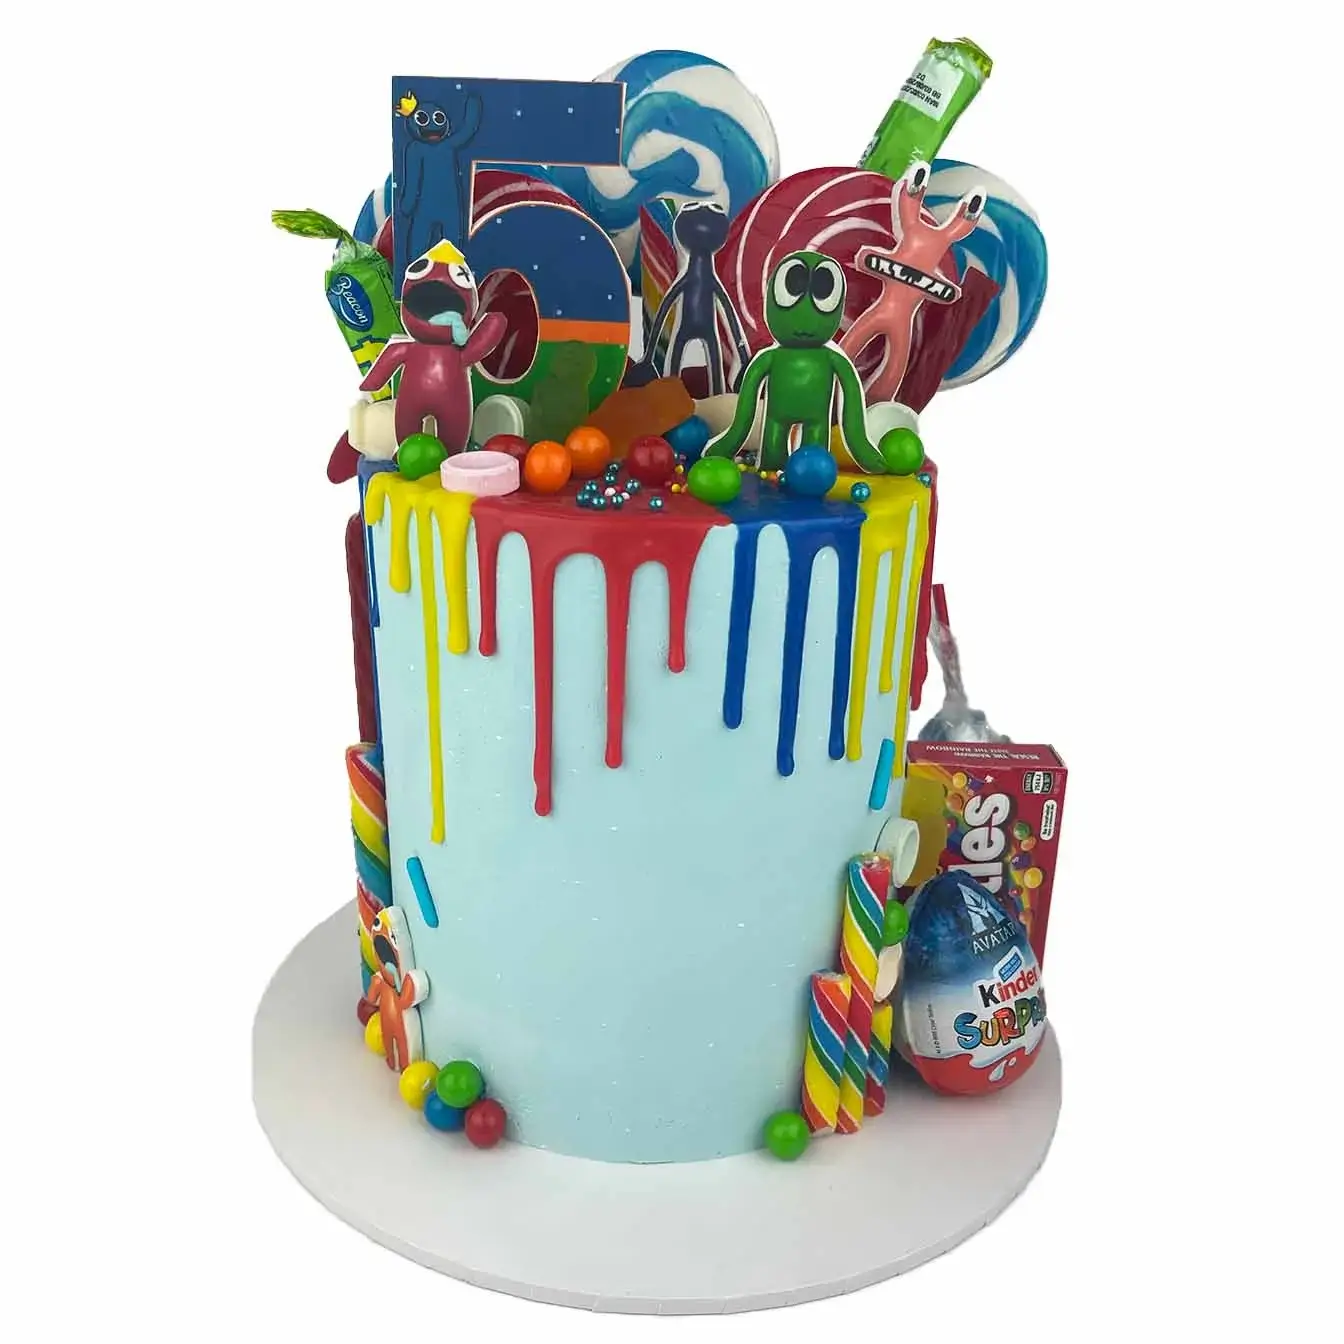 Rainbow Friends Cake - A cake with a colorful rainbow drip, assorted lollies, and 2D edible image characters of Rainbow Friends, a vibrant centerpiece for celebrations filled with friendship and fun.